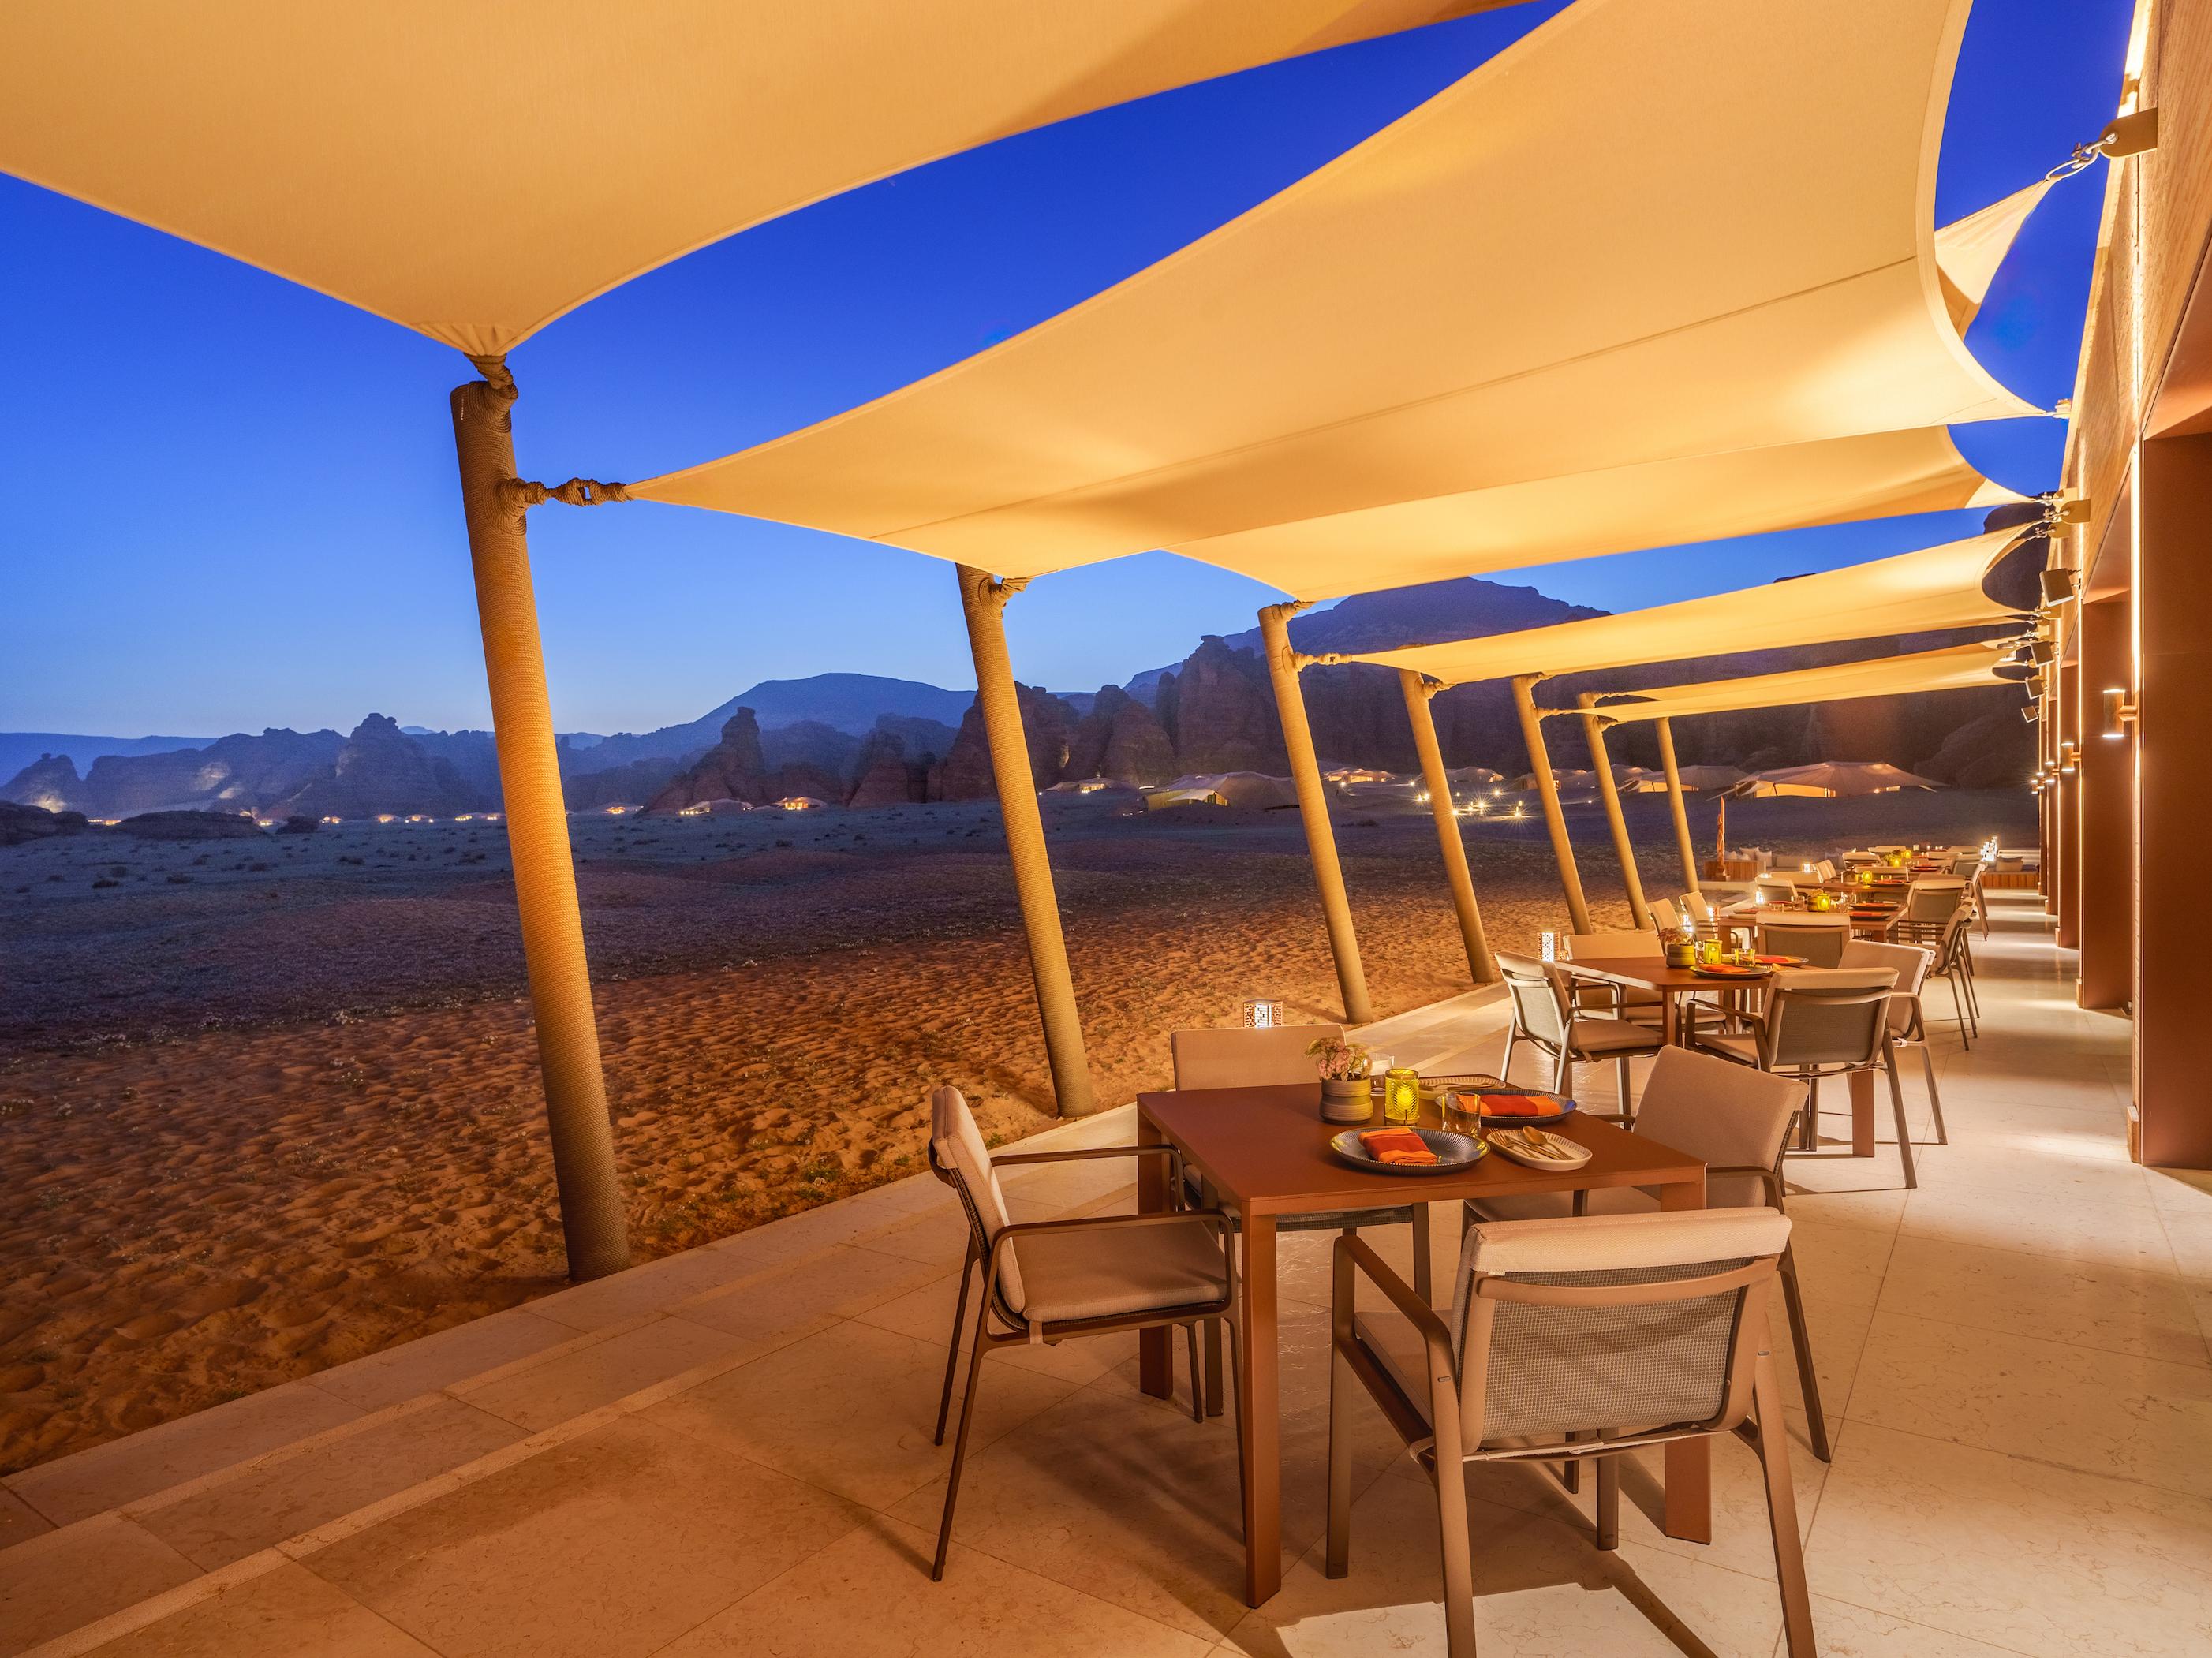 5-Star Restaurant in AlUla at Night Time